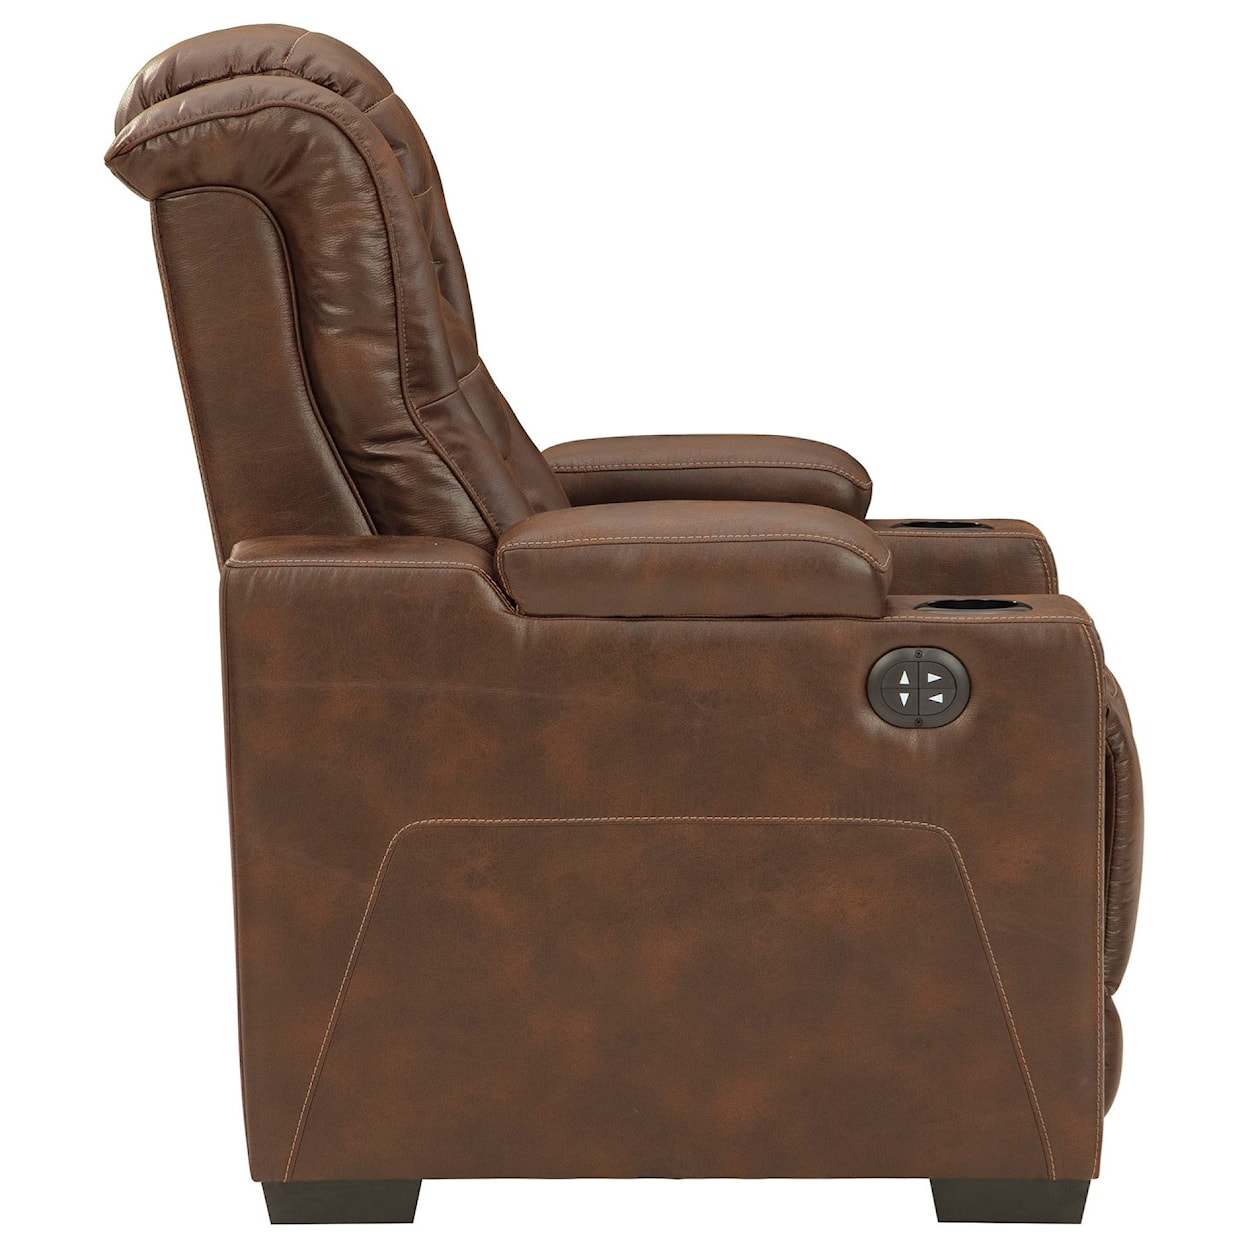 Signature Design by Ashley Furniture Owner's Box Power Recliner with Adjustable Headrest